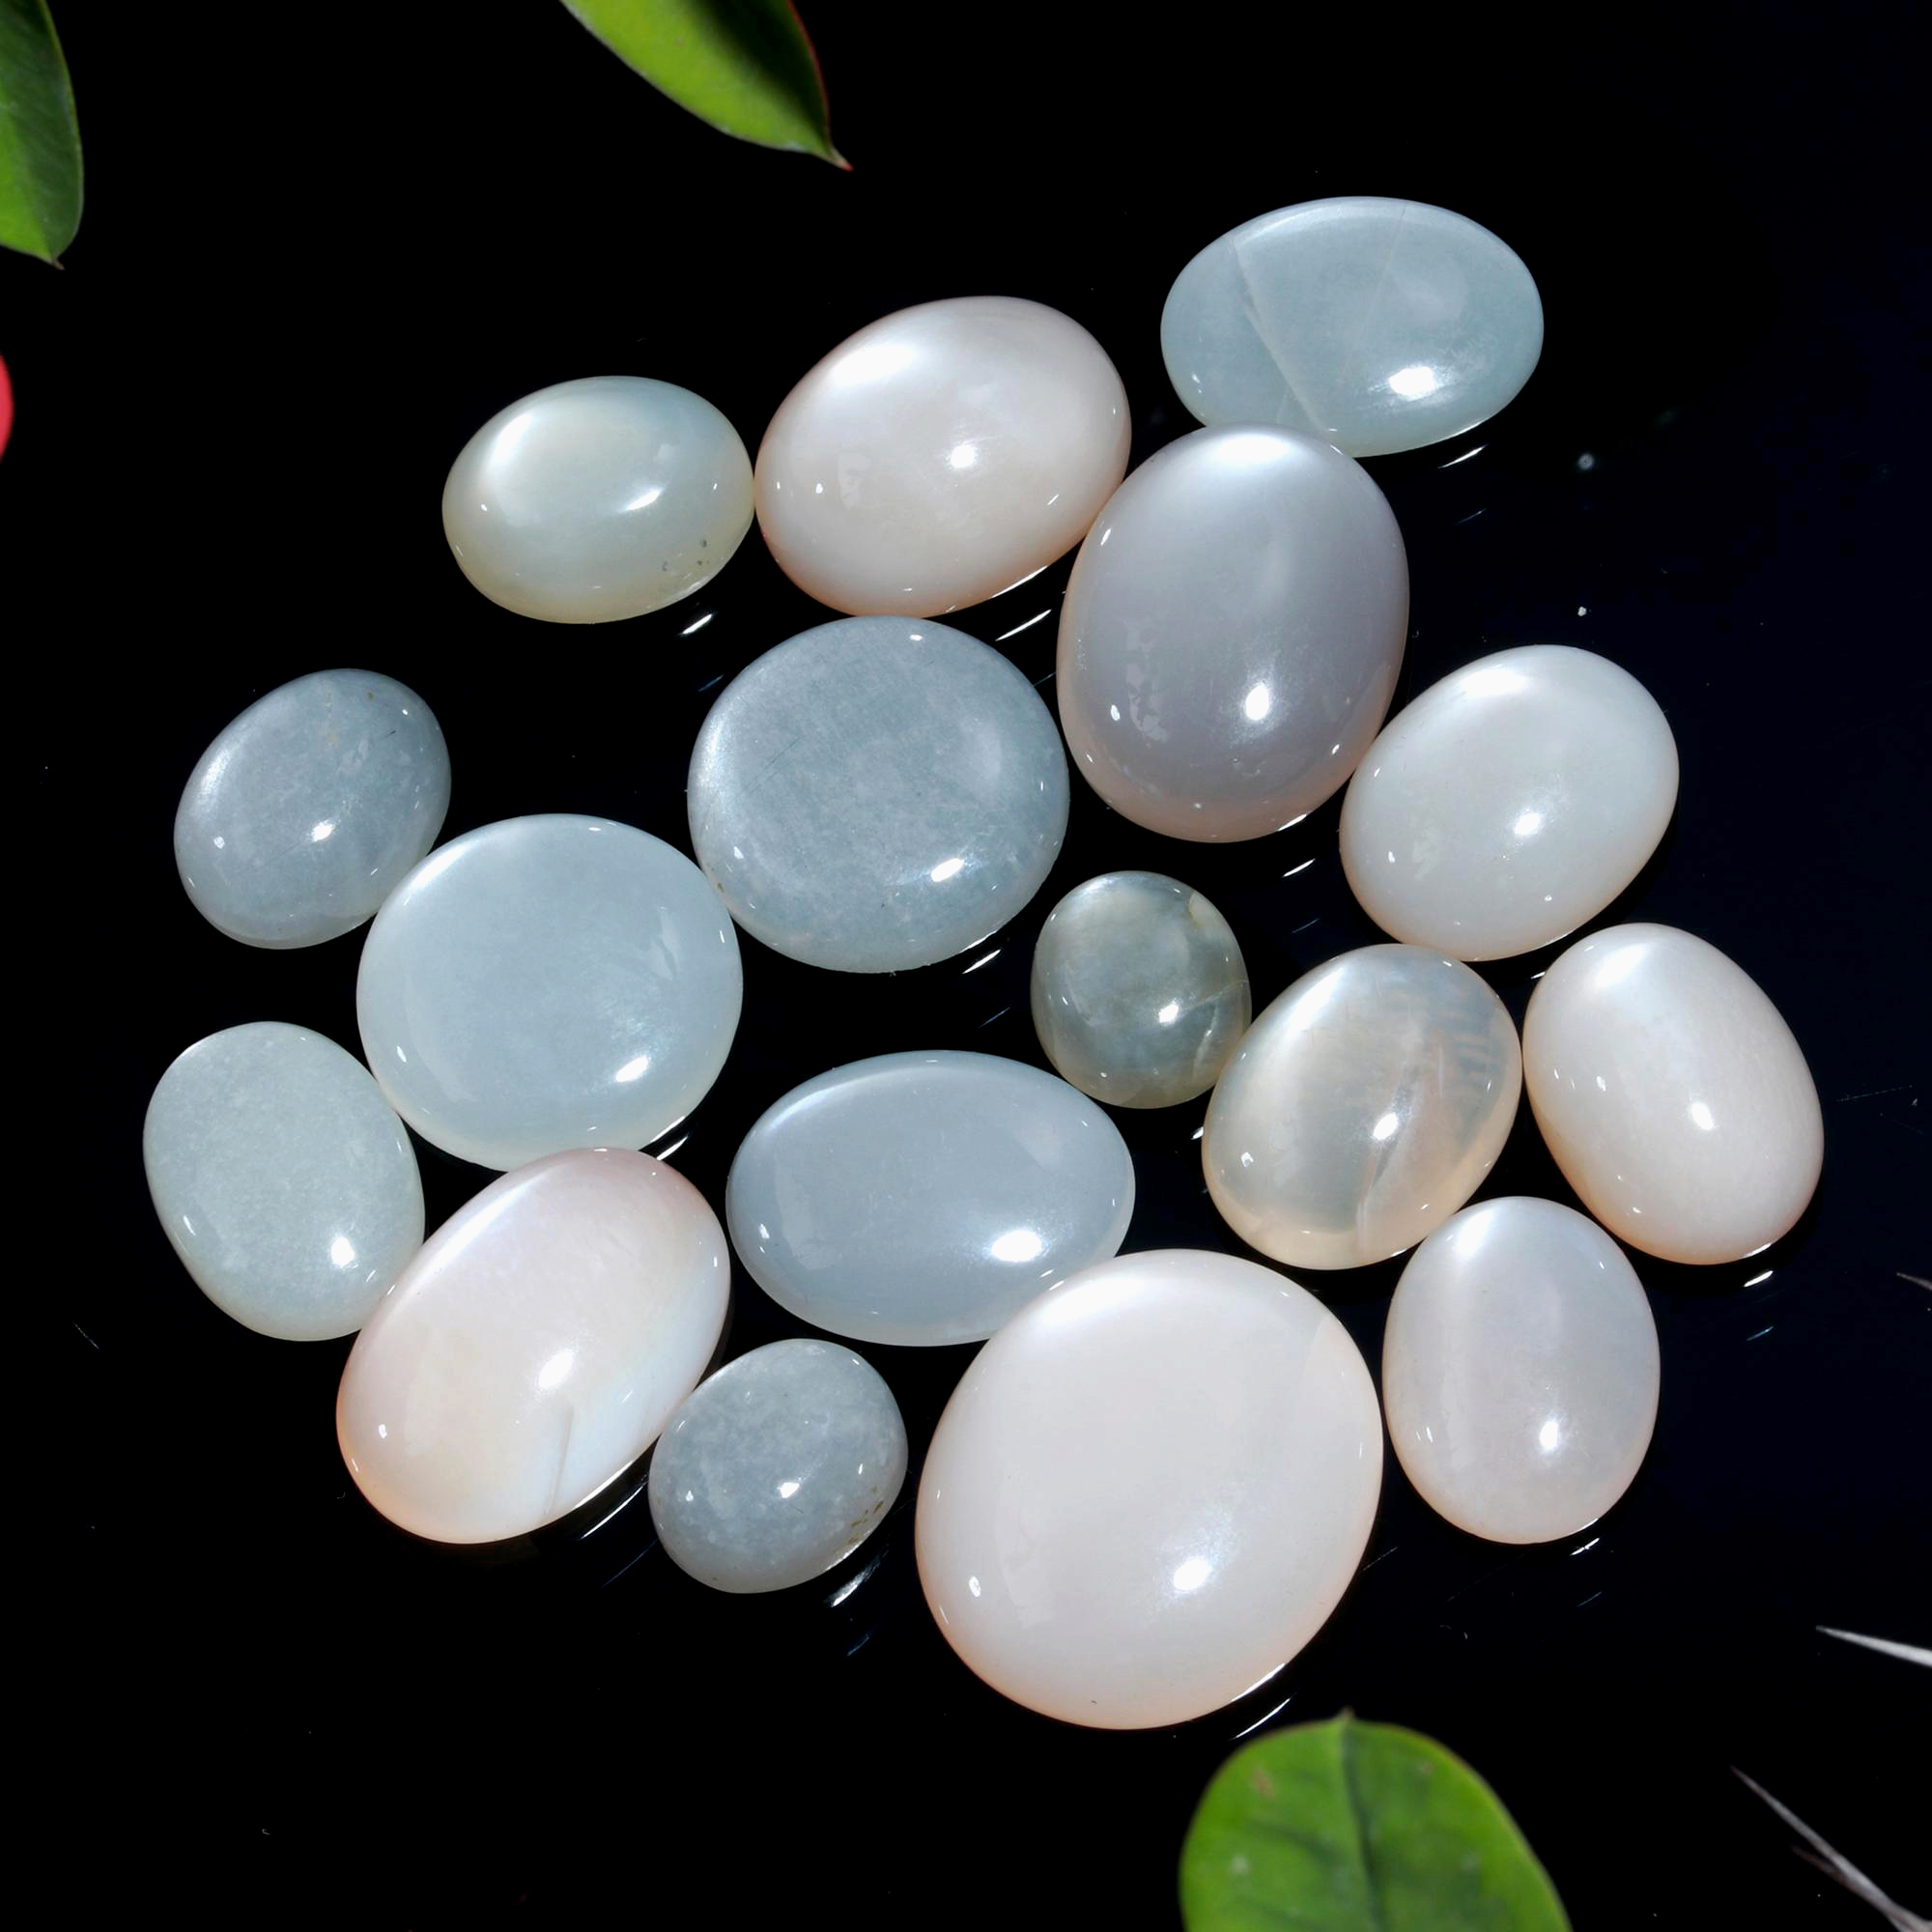 17 Pcs. 187Cts. Natural Grey Rainbow Moonstone polished Mix Cabochon Wholesale Loose Lot Size 22x18 14x14mm Gemstone for jewelry